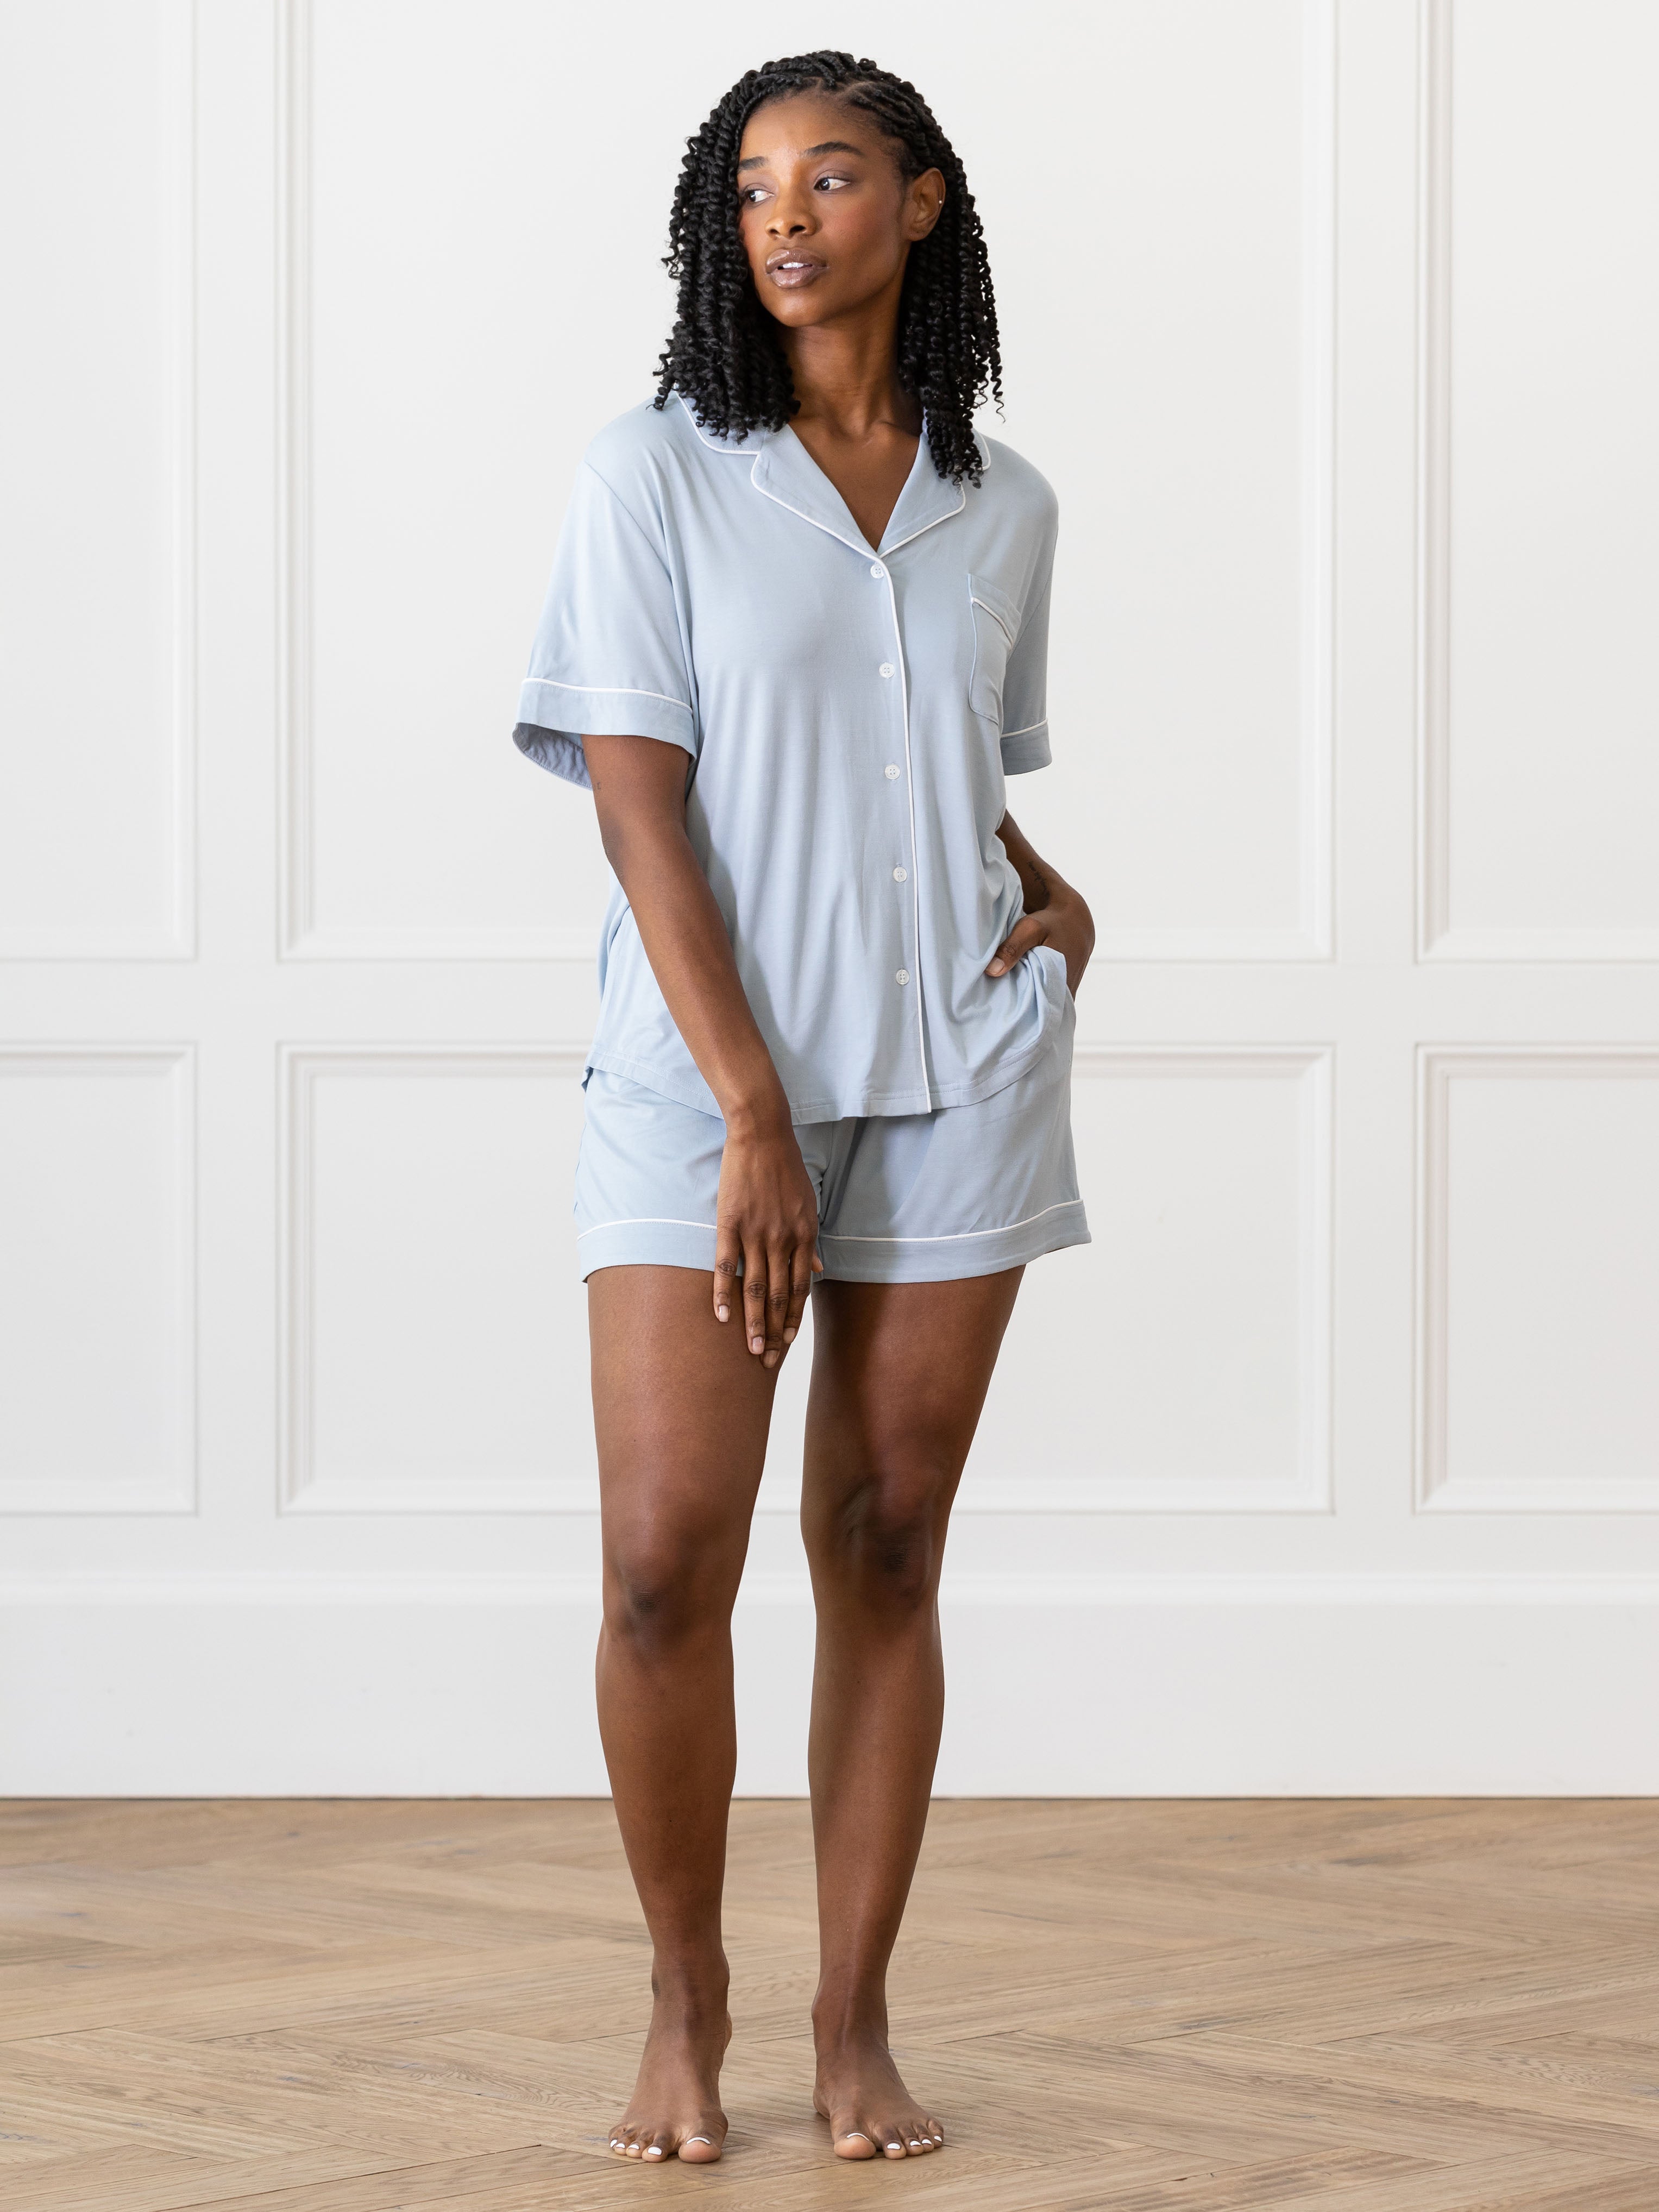 Powder Blue Short Sleeve Pajama Set modeled by a woman. The photo was taken in a light setting, showing off the colors and lines of the pajamas. |Color:Powder Blue